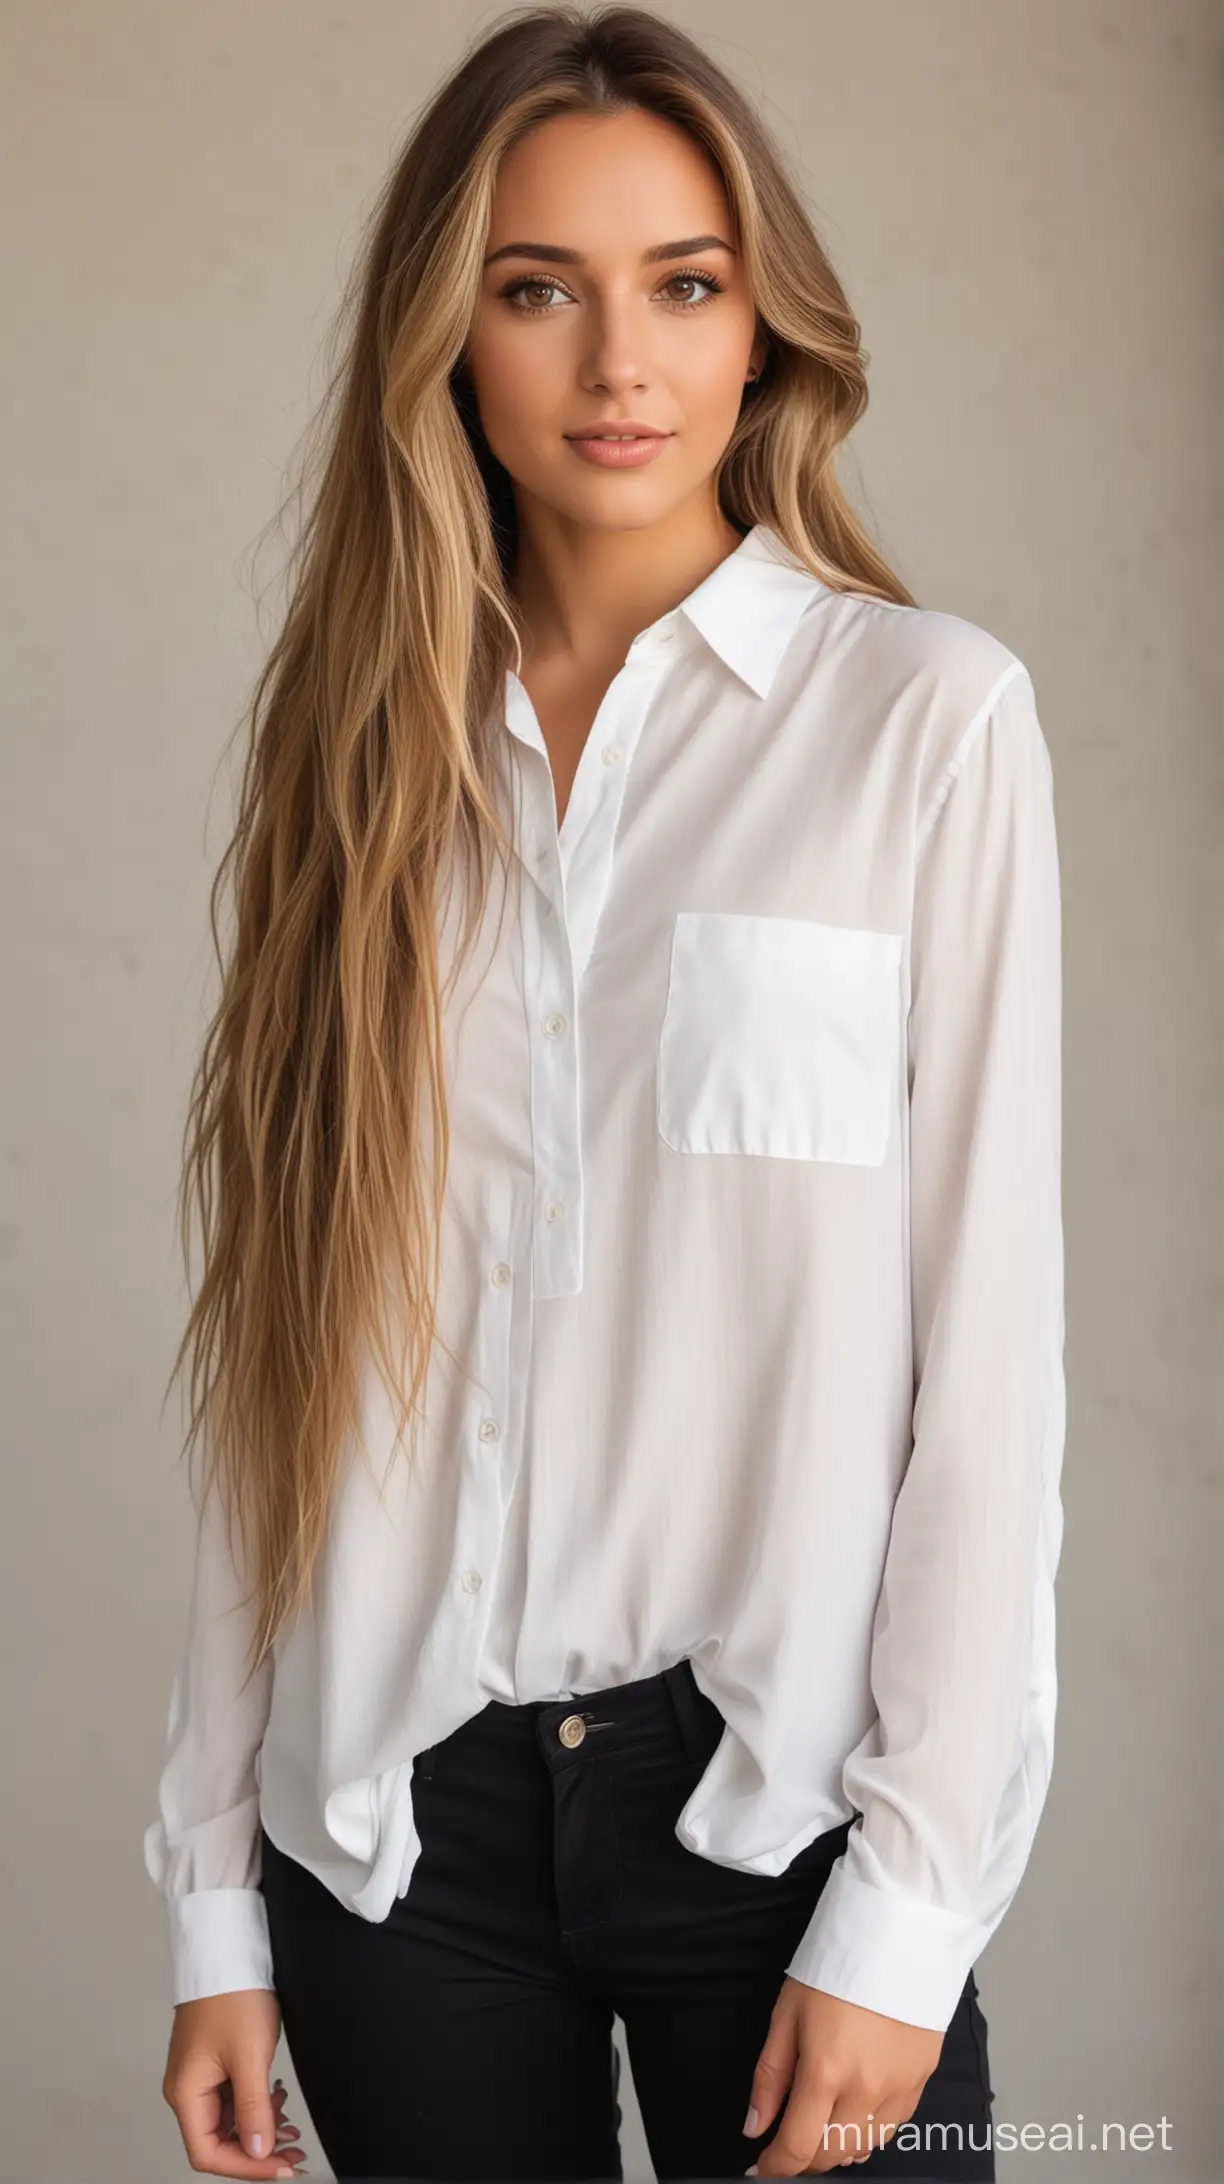 A cute brunette woman with brown eyes and very long blonde hair
She wears black pants and a white shirt